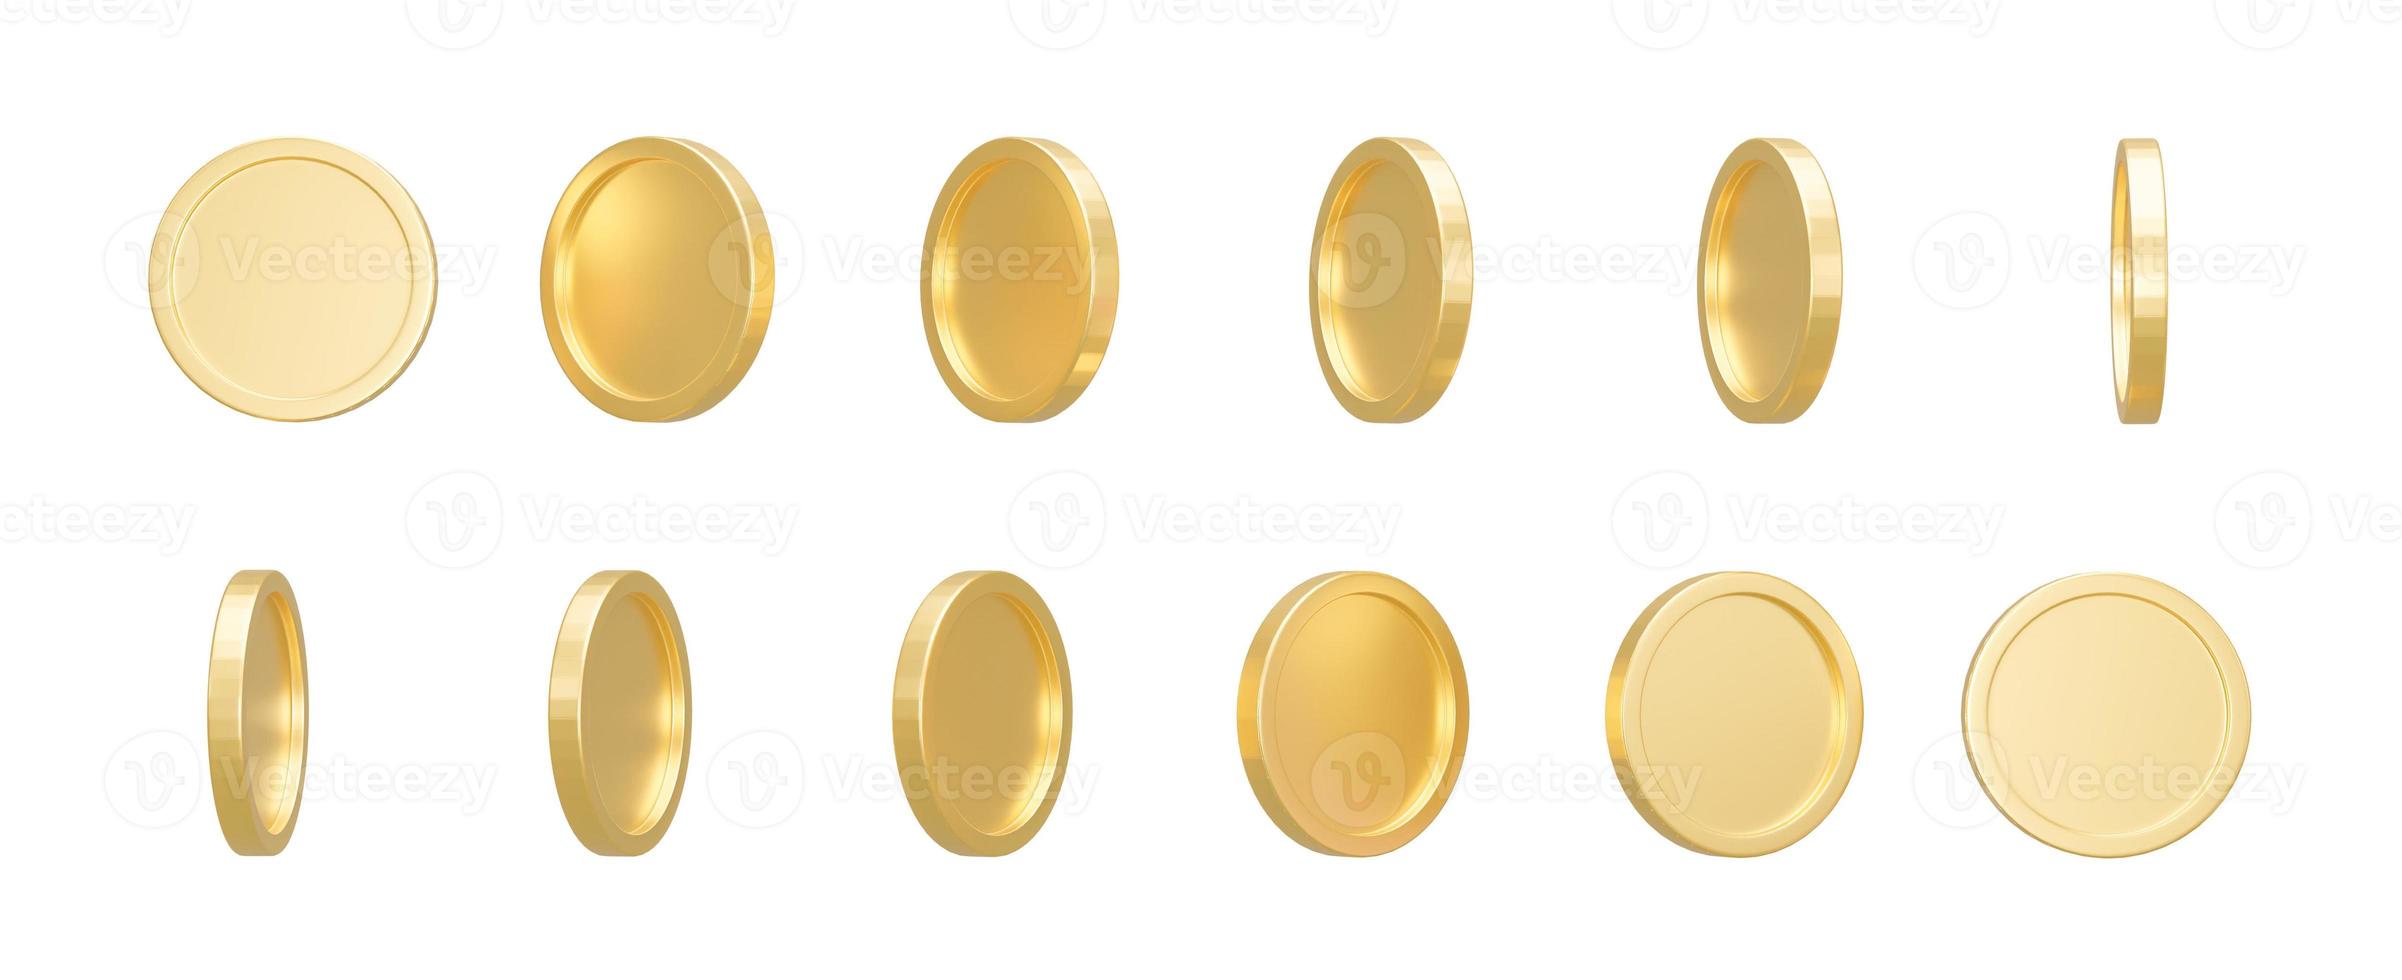 Set of golden coin in different shape isolated on white background. 3d illustration. 3d rendering photo